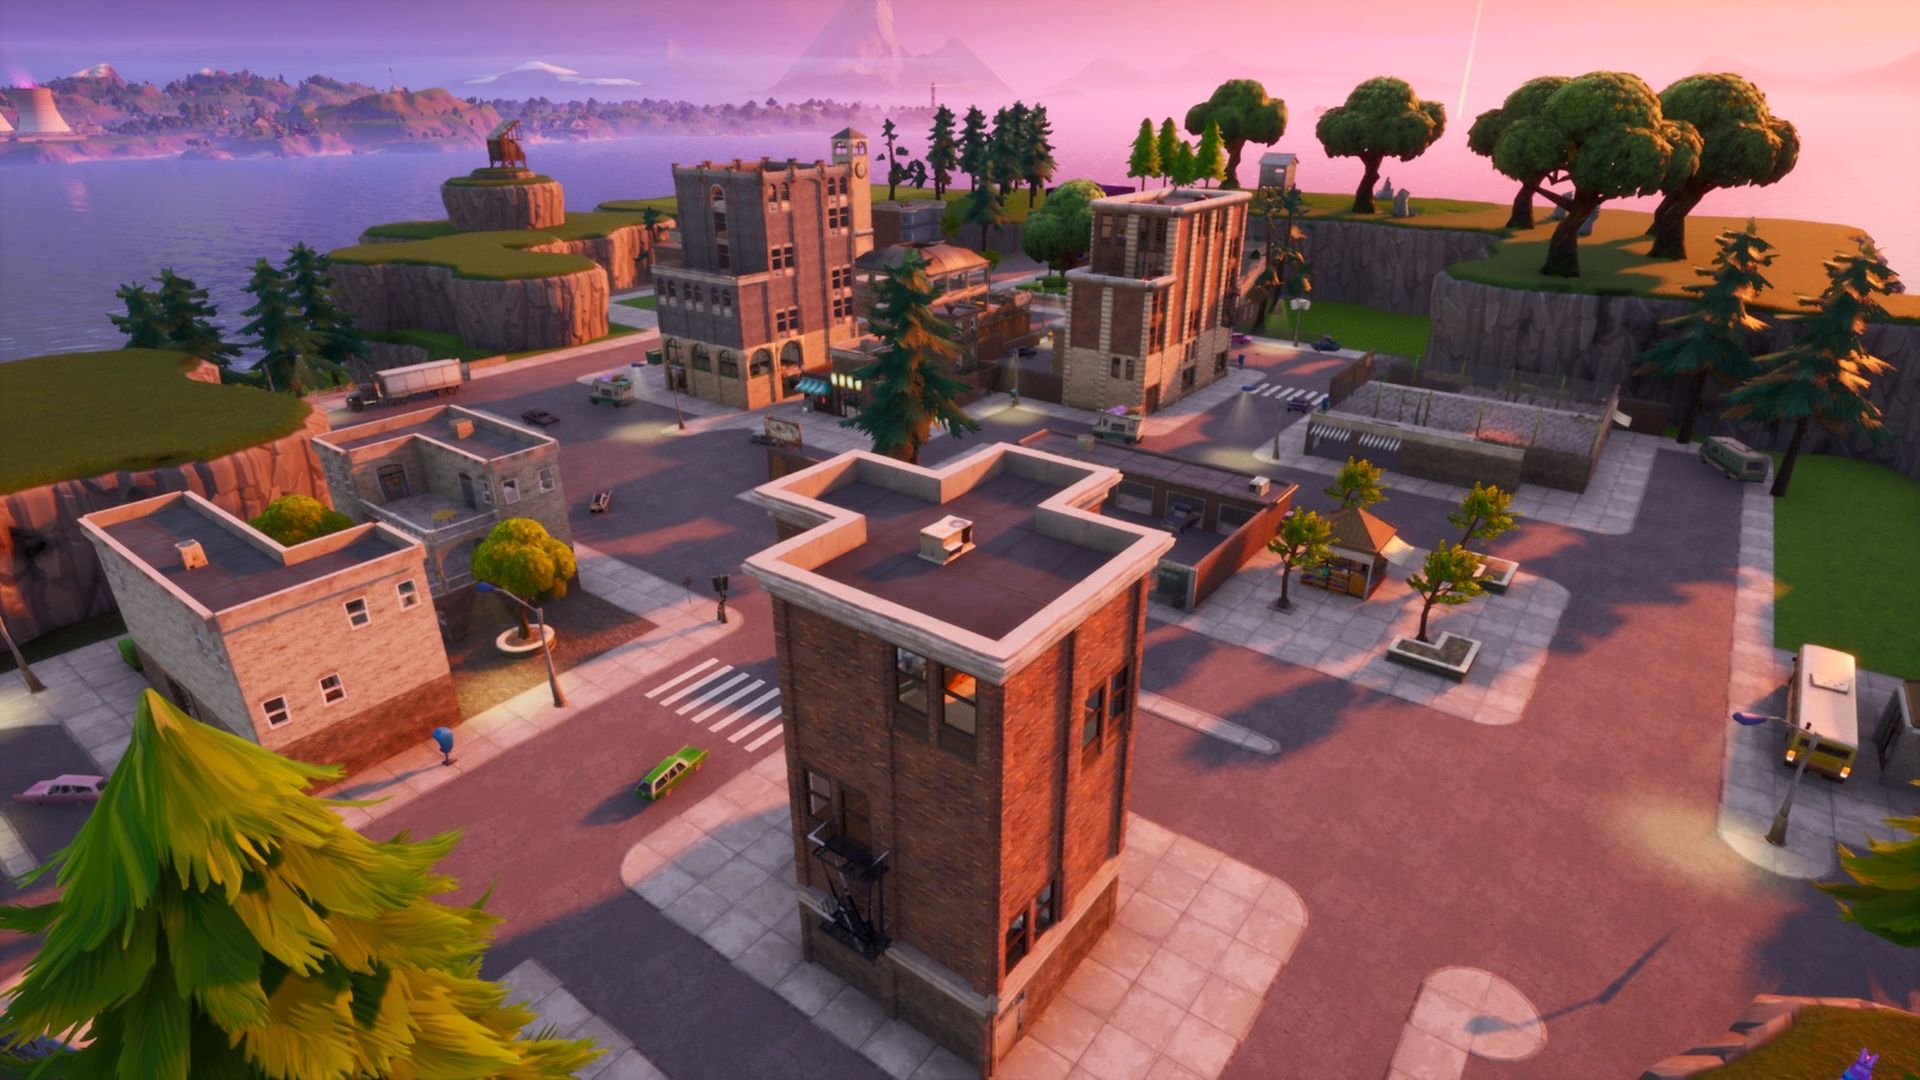 Today we are going to review everything related to the return of the Fortnite Block 2. The Block is scheduled to return in version 2.0 of the game, which will include new features, props, and more. Players will have the ability to assist in the re-building of Tilted Towers this time around.